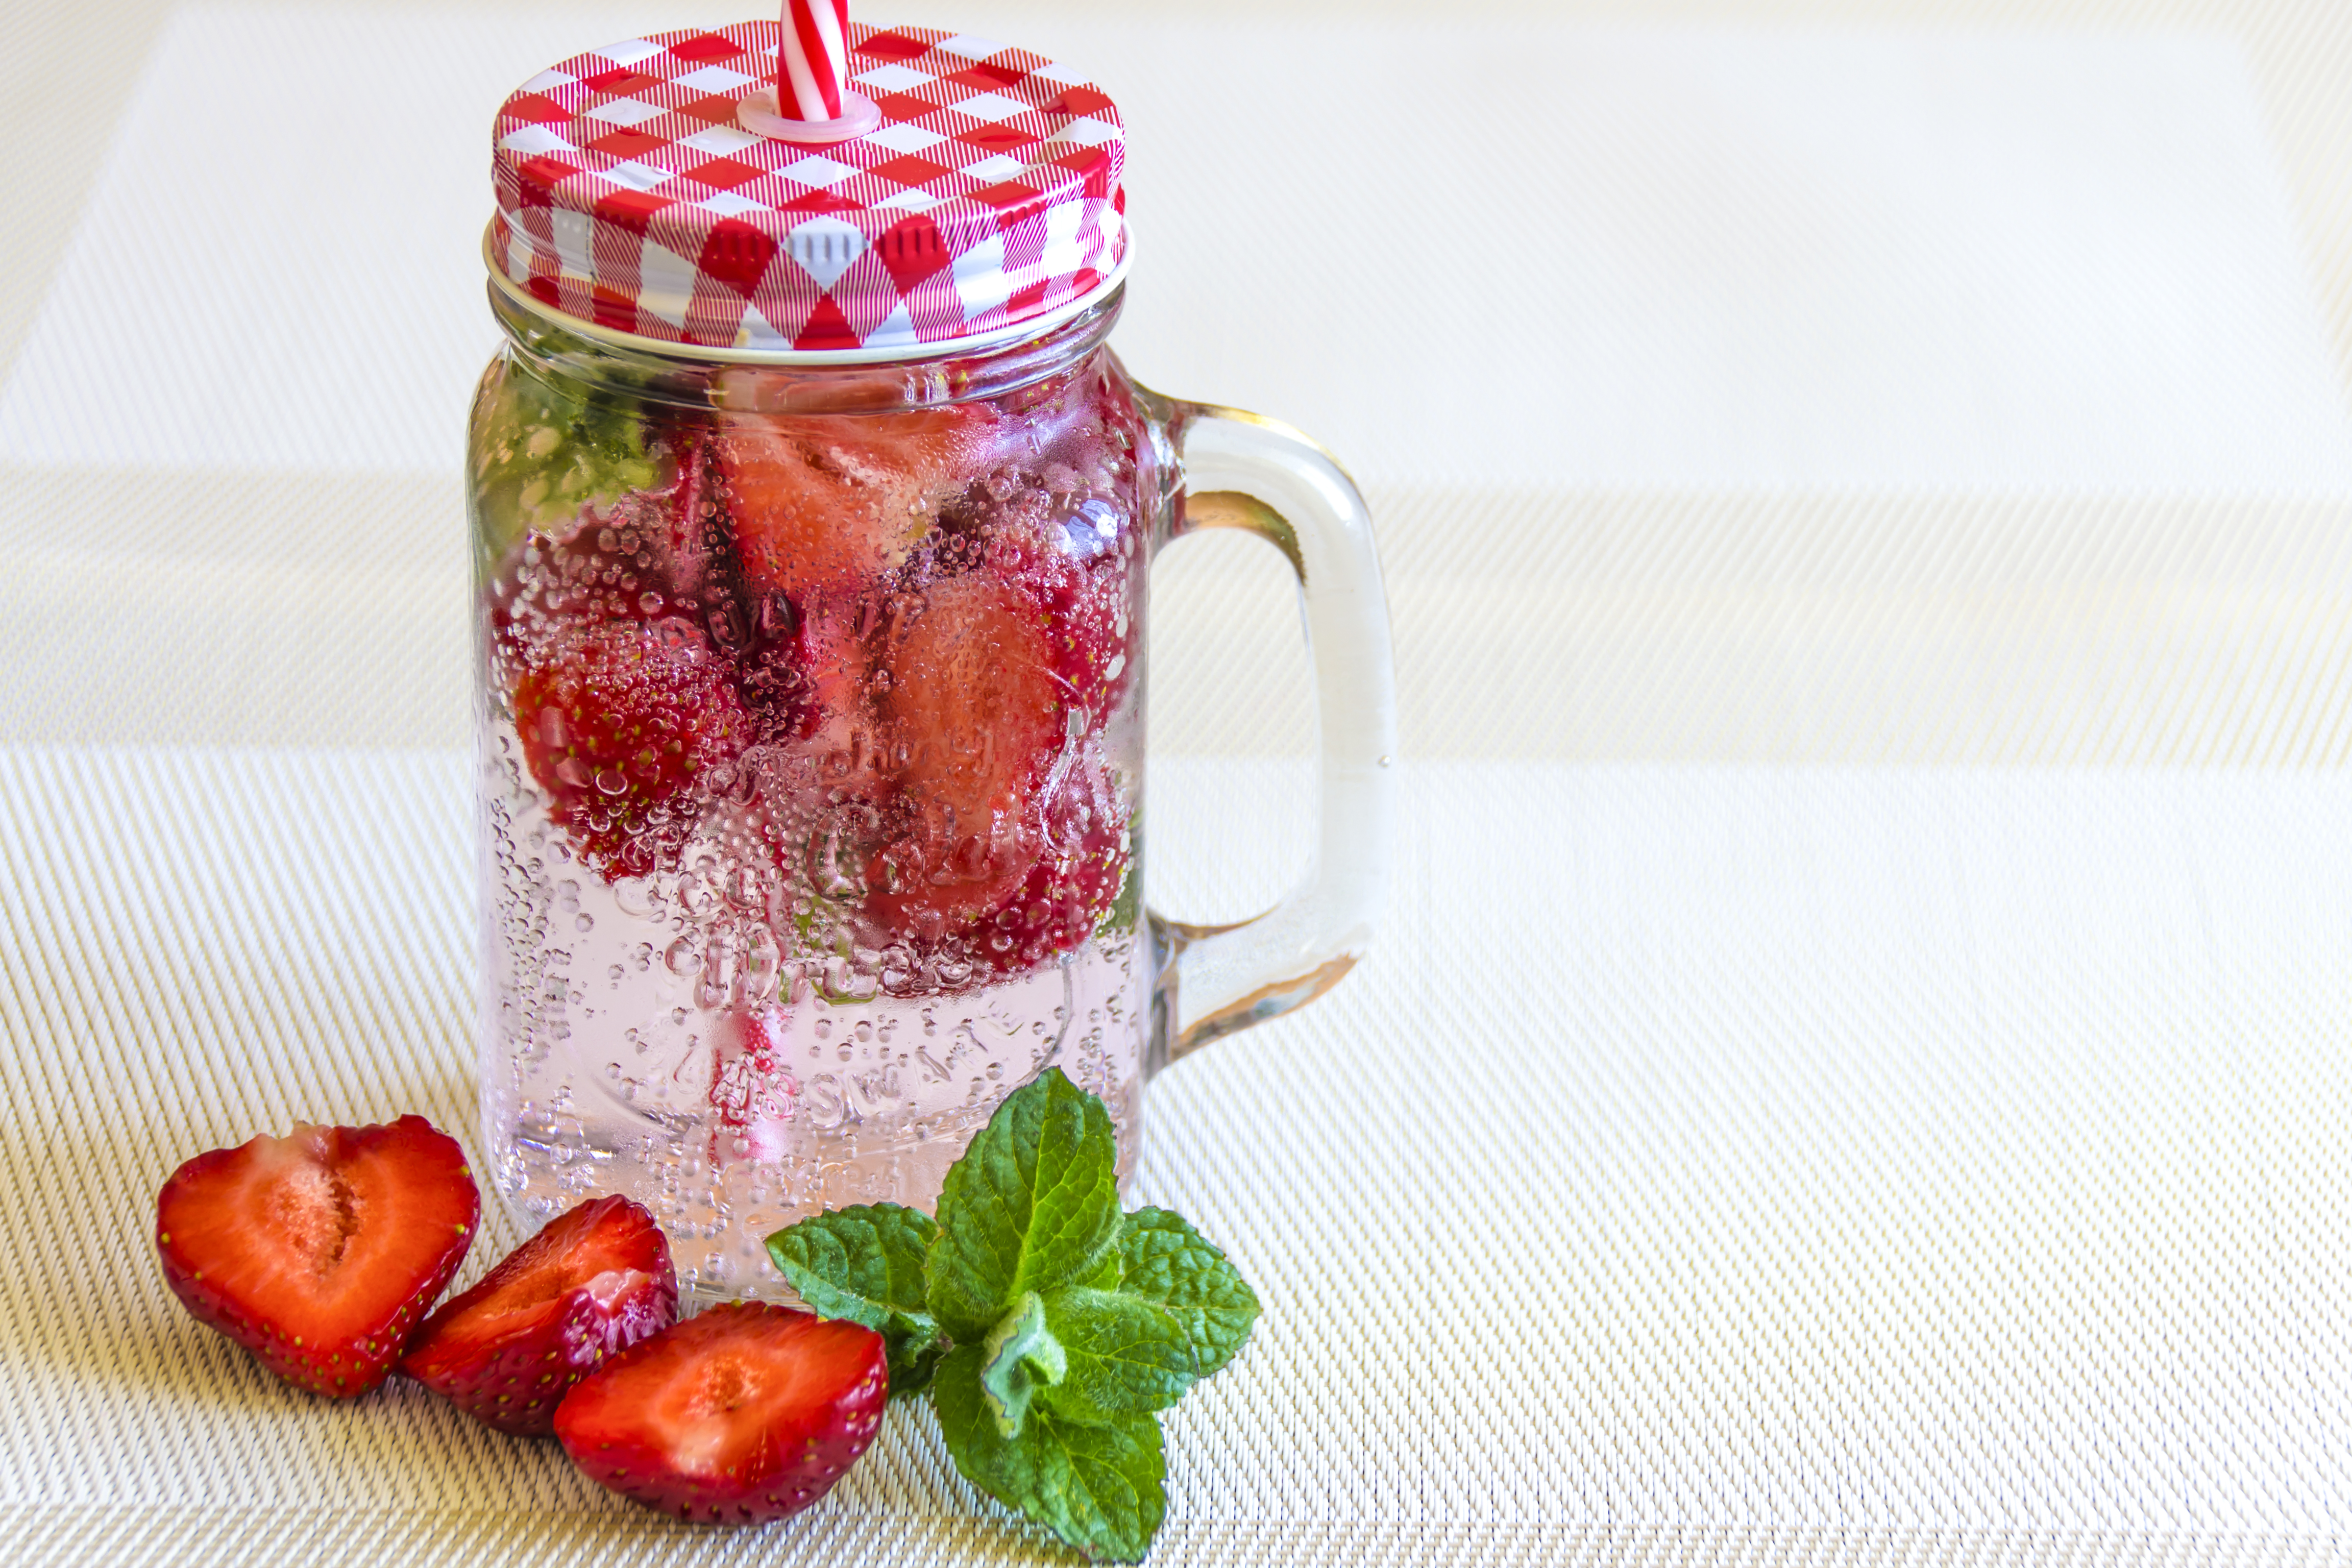 Though there are many ways to drink tasty water. Strawberry mint water is one of my favorites. Here is a jar with strawberry, water and mint.